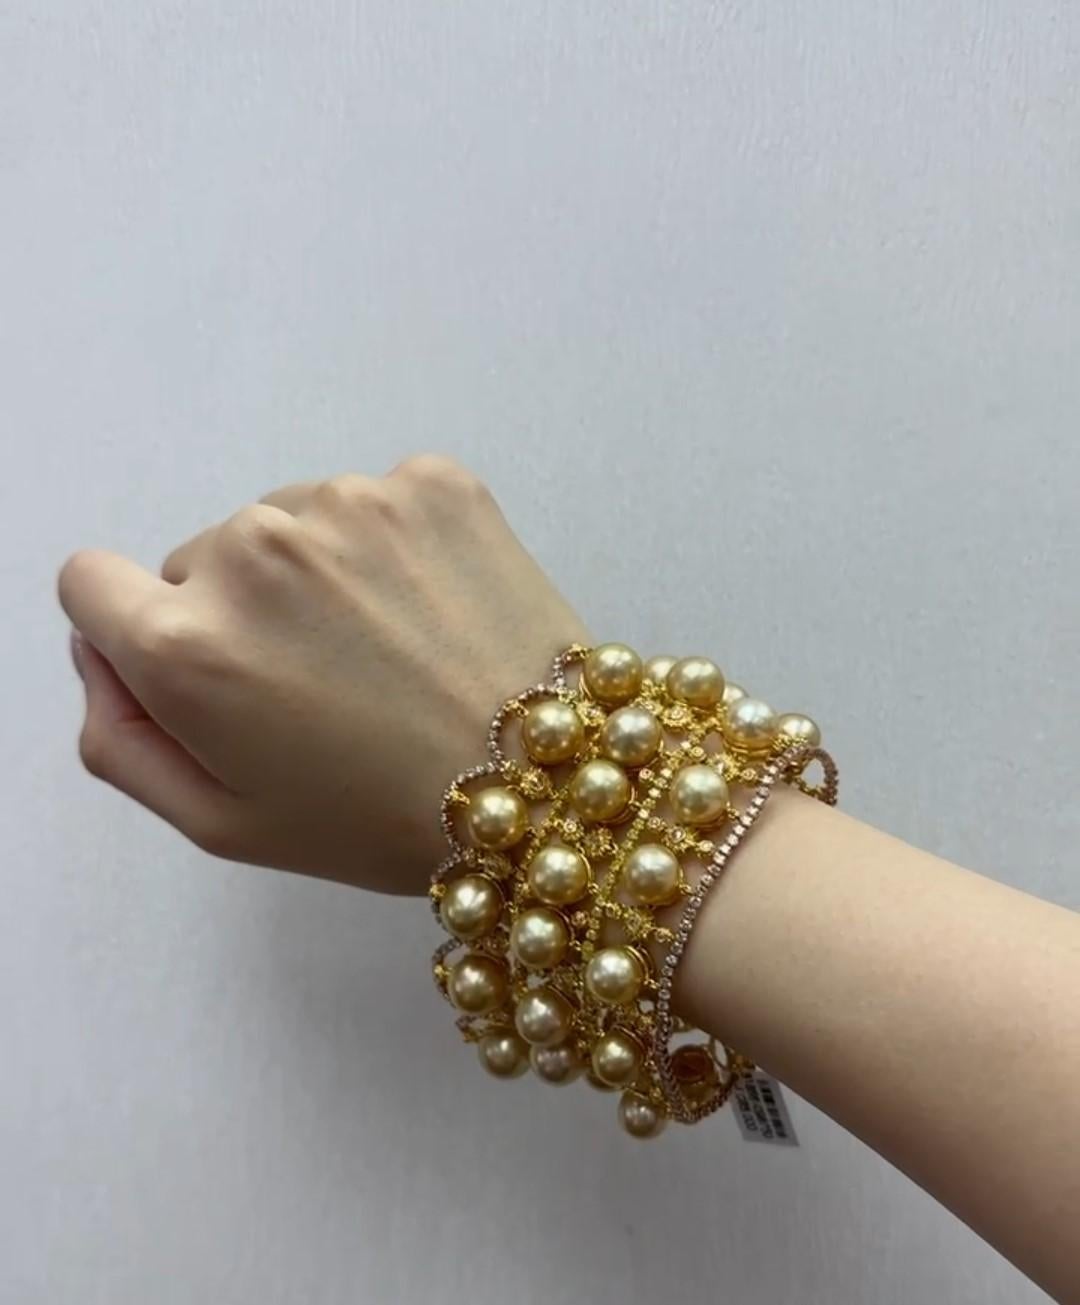 The Following Item we are offering is this Beautiful Rare Important 18KT Gold Fancy Large Golden Pearl and Fancy Yellow Diamond Bracelet. Bracelet is comprised of 34 Magnificent 9-11MM High Luster Large AA-AAA GOLDEN PRISTINE SOUTH SEA PEARLS that